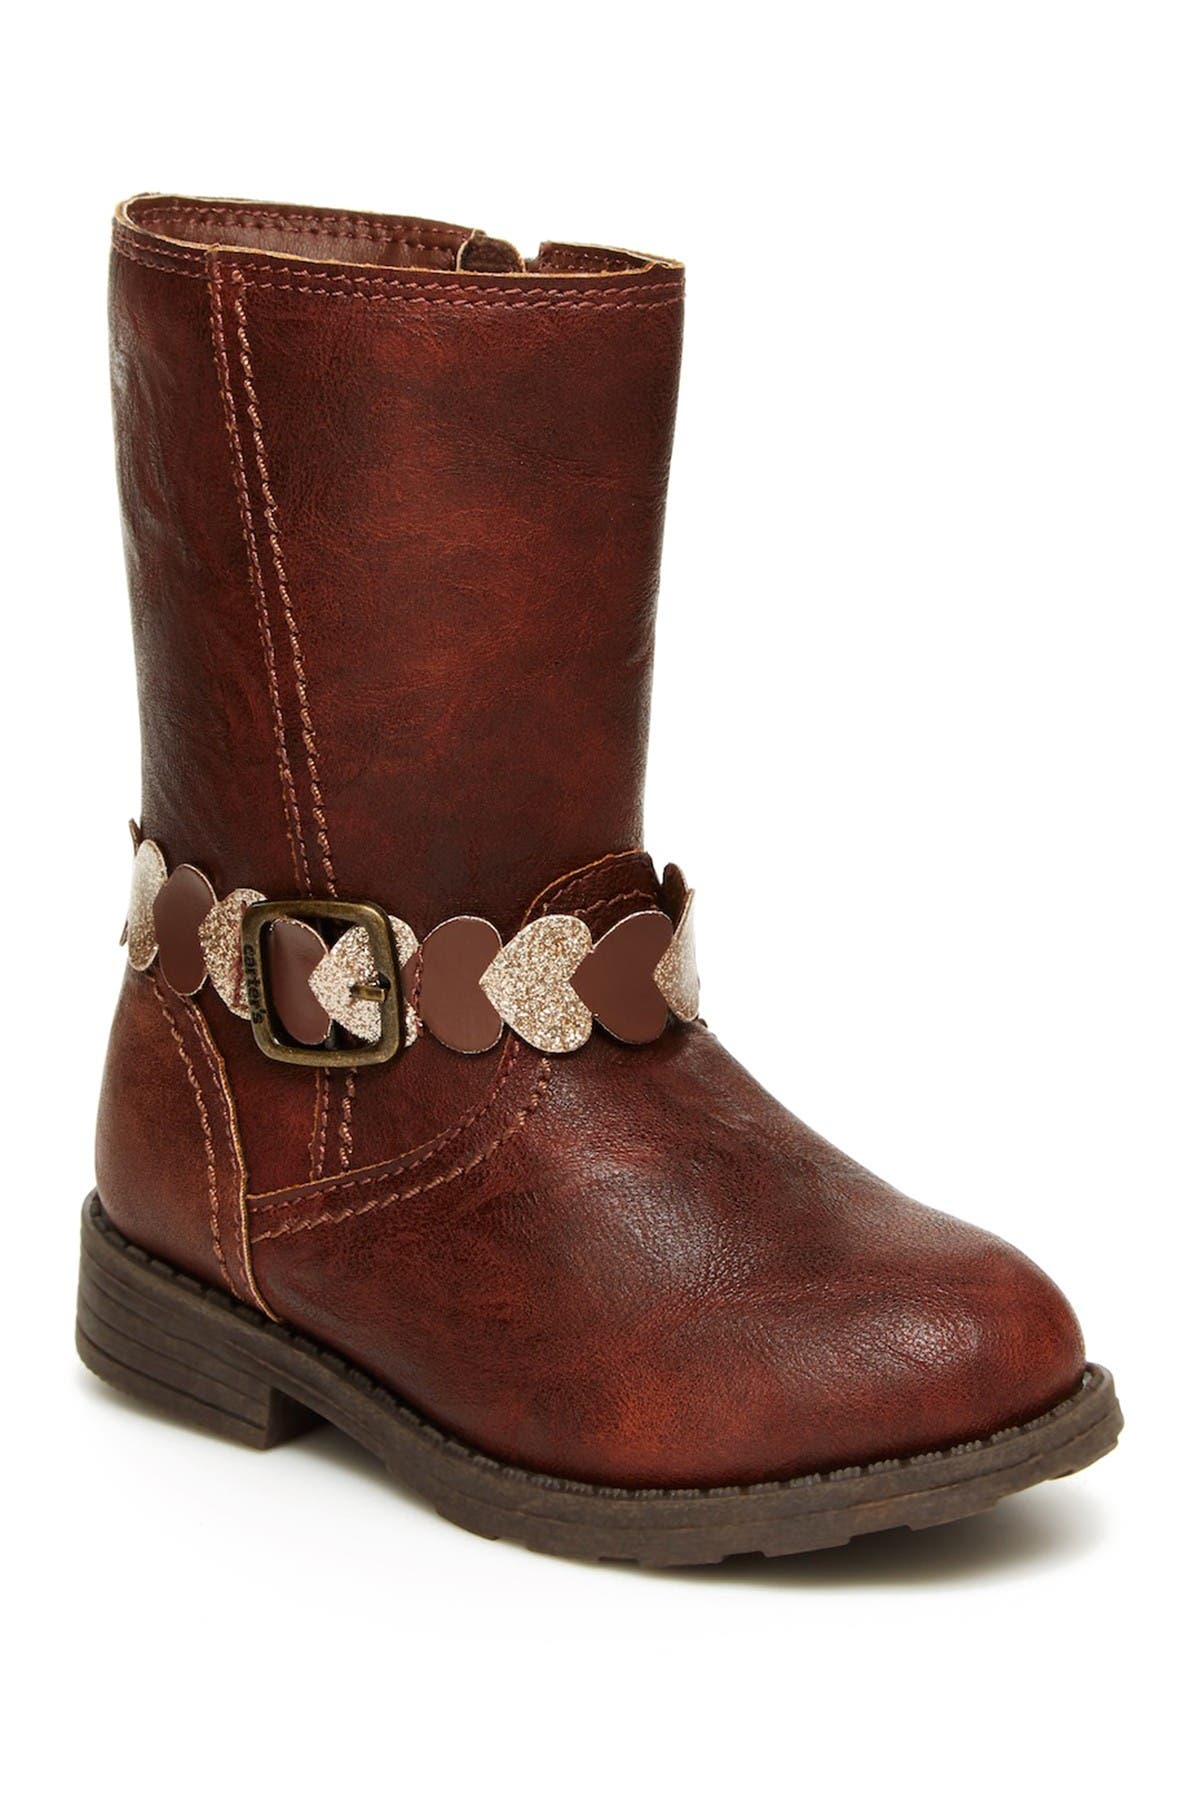 carter's buckle boots